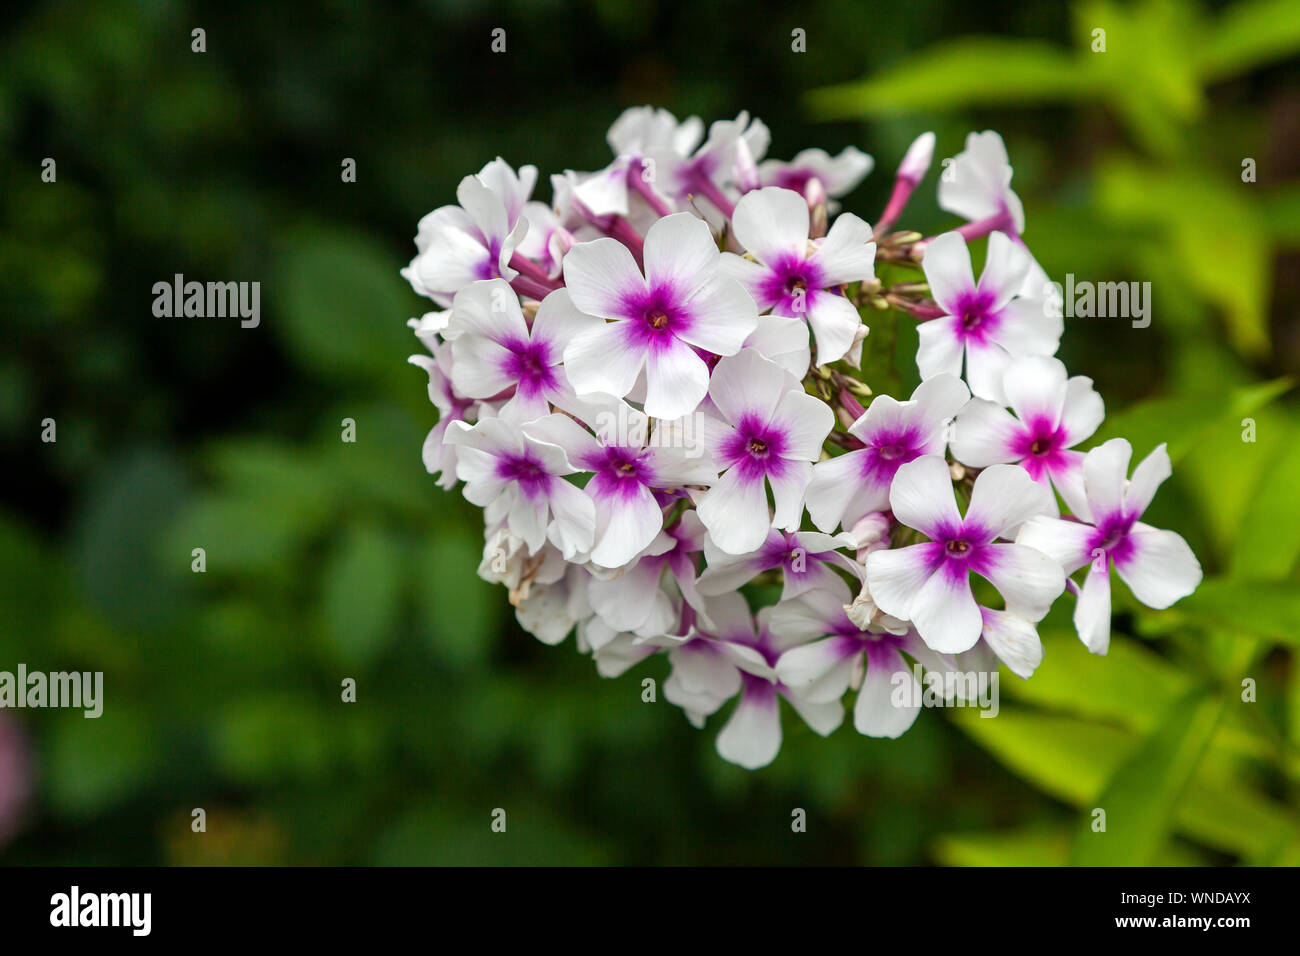 Close-up beautiful fresh white and pink royal phlox flower on a background of green grass grows in a home garden, top view. Flowering garden flowers Stock Photo